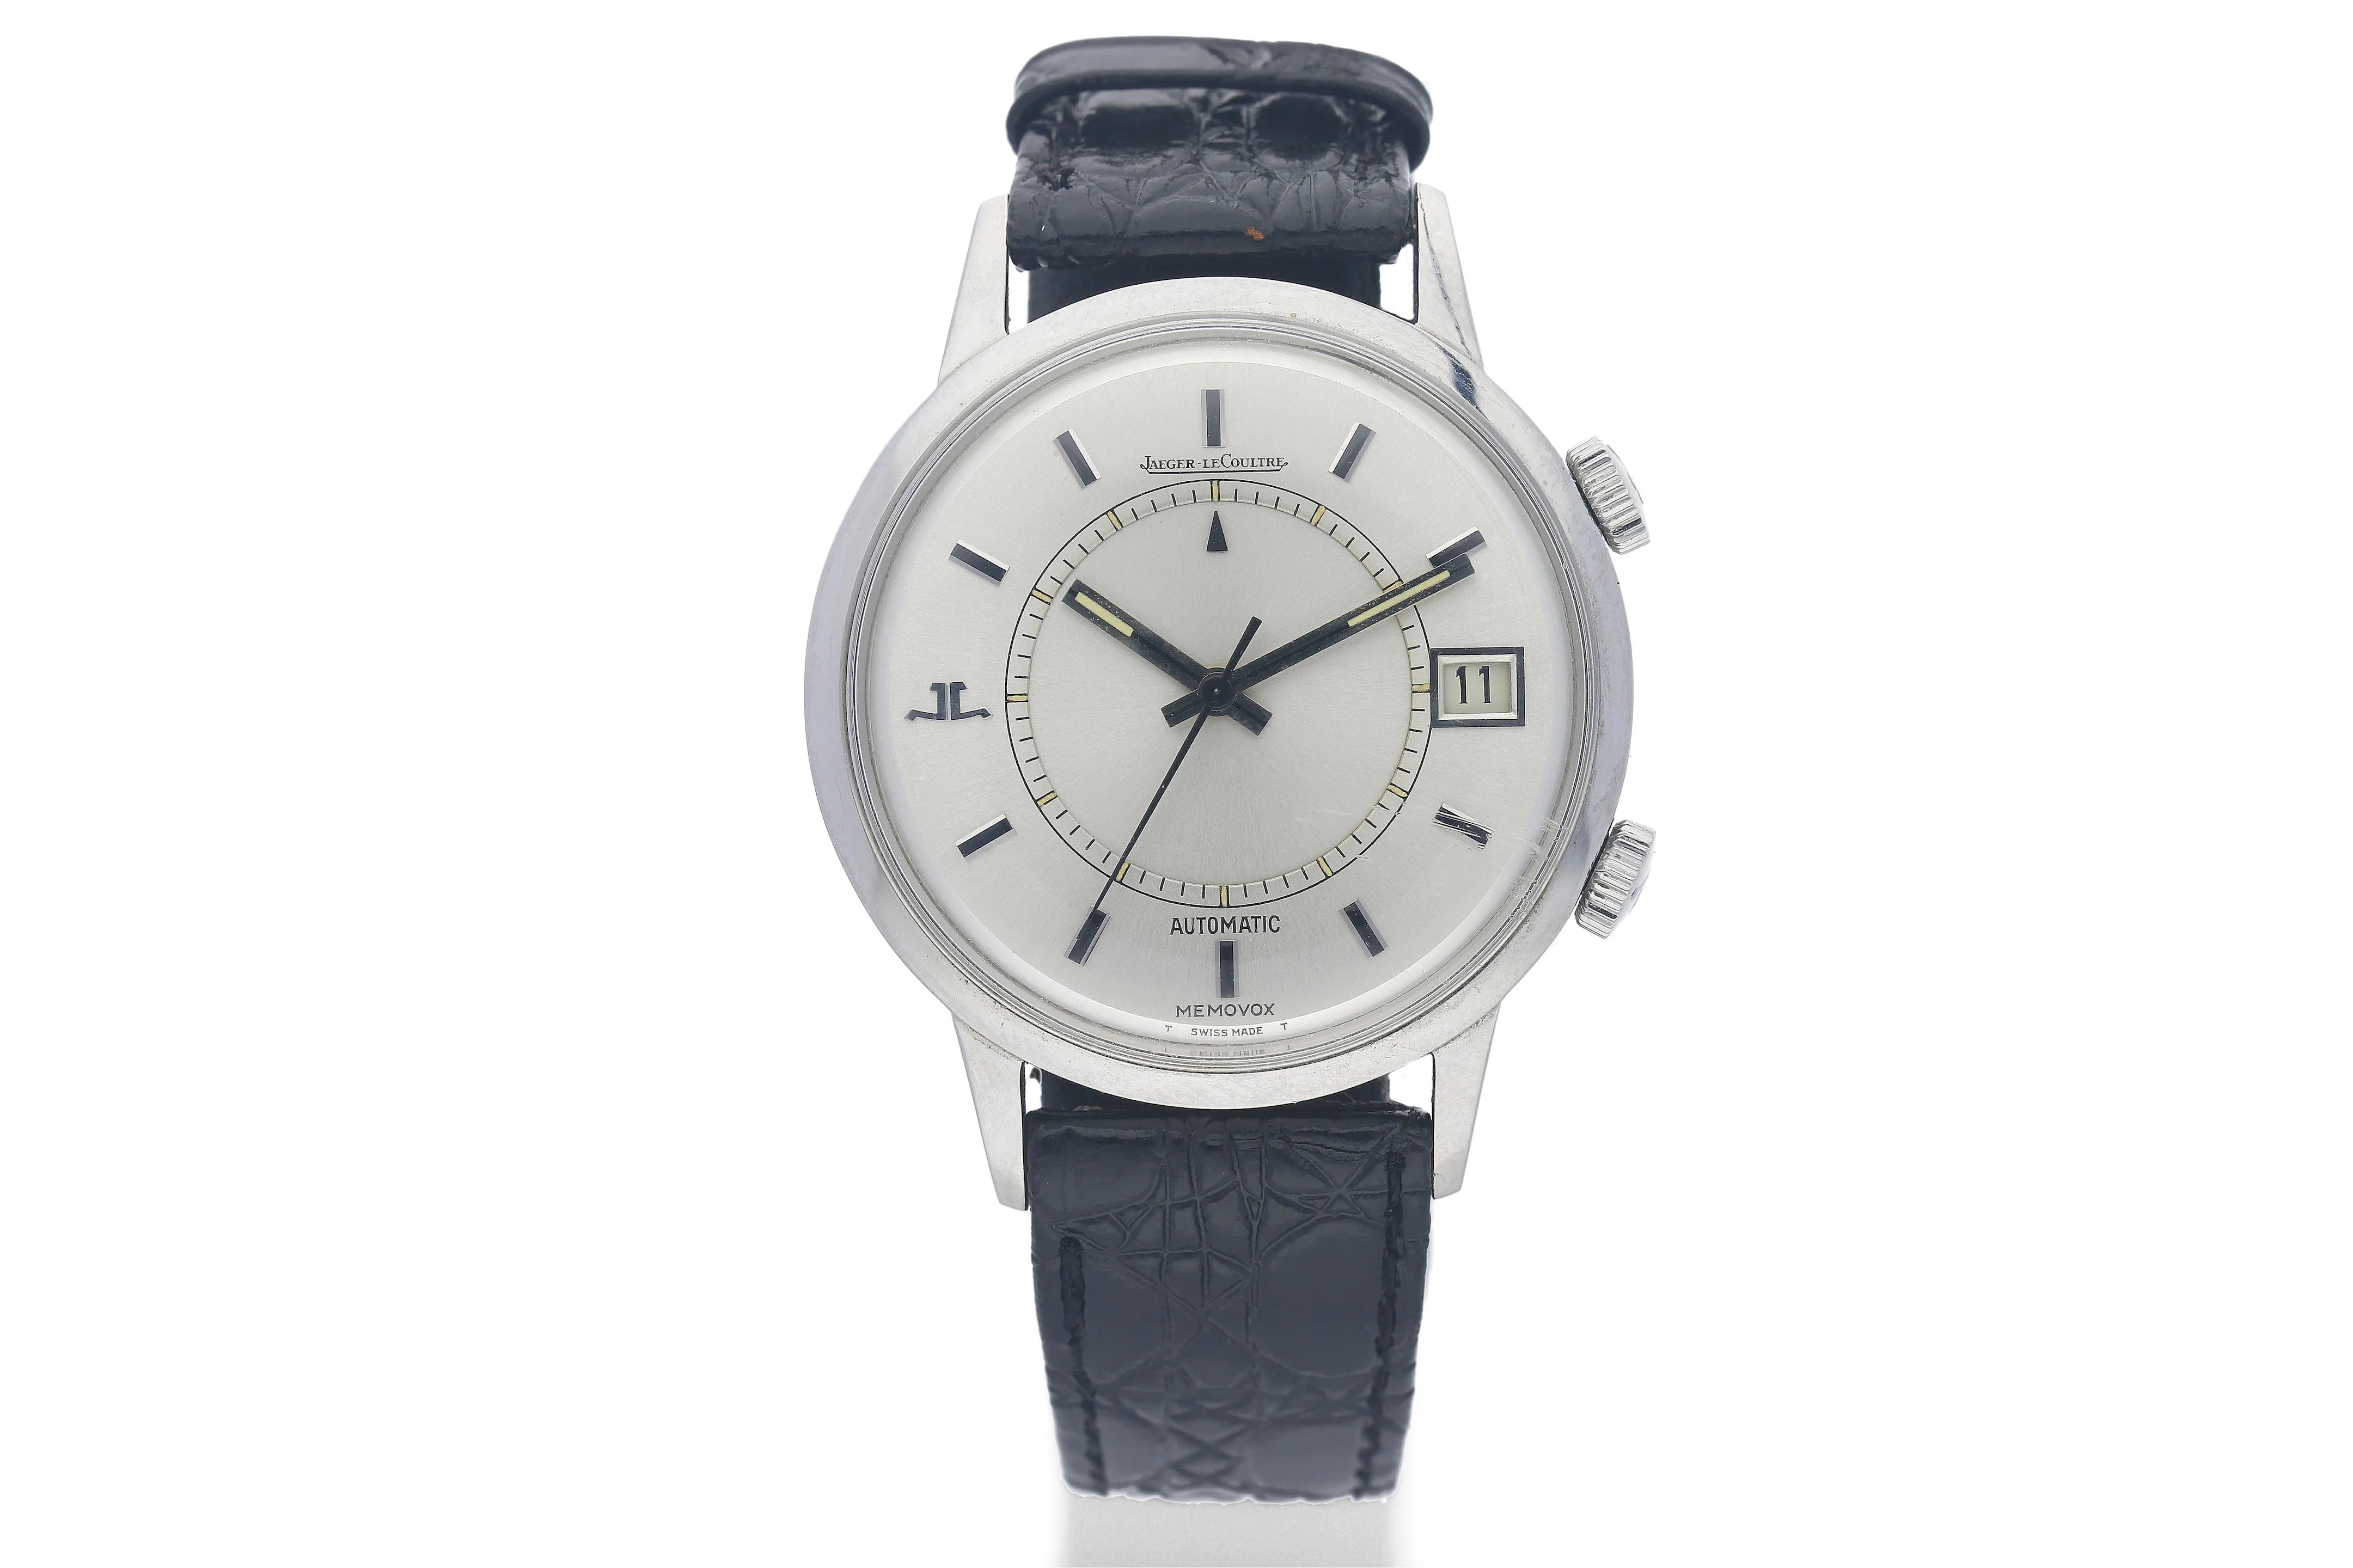 Jaeger-LeCoultre Memovox 875.42 37mm Stainless steel Silver